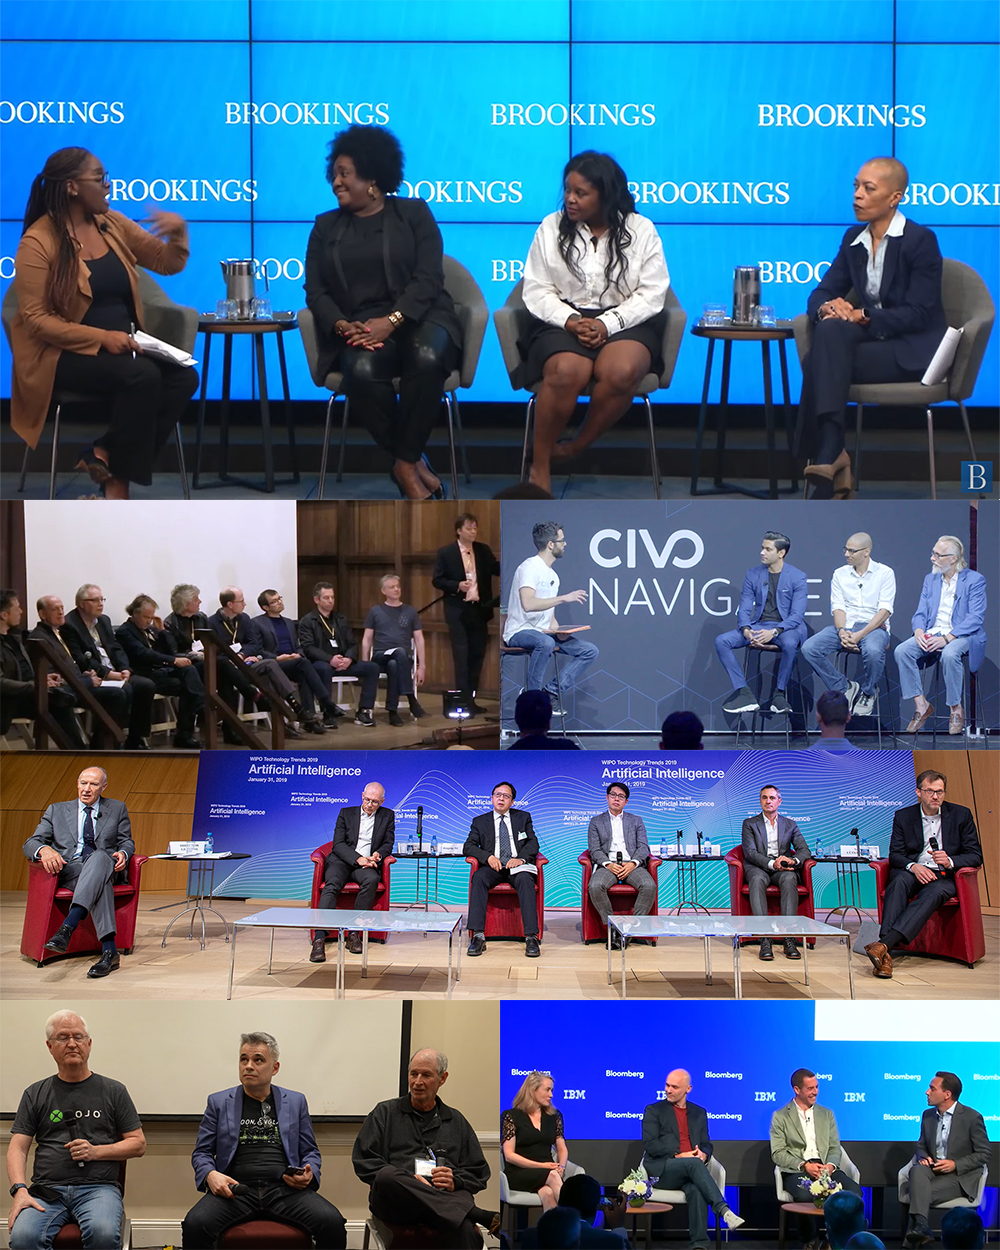 At the top, a panel of Black women discussing AI; below, a selection of panels on AI comprised almost entirely of white men.